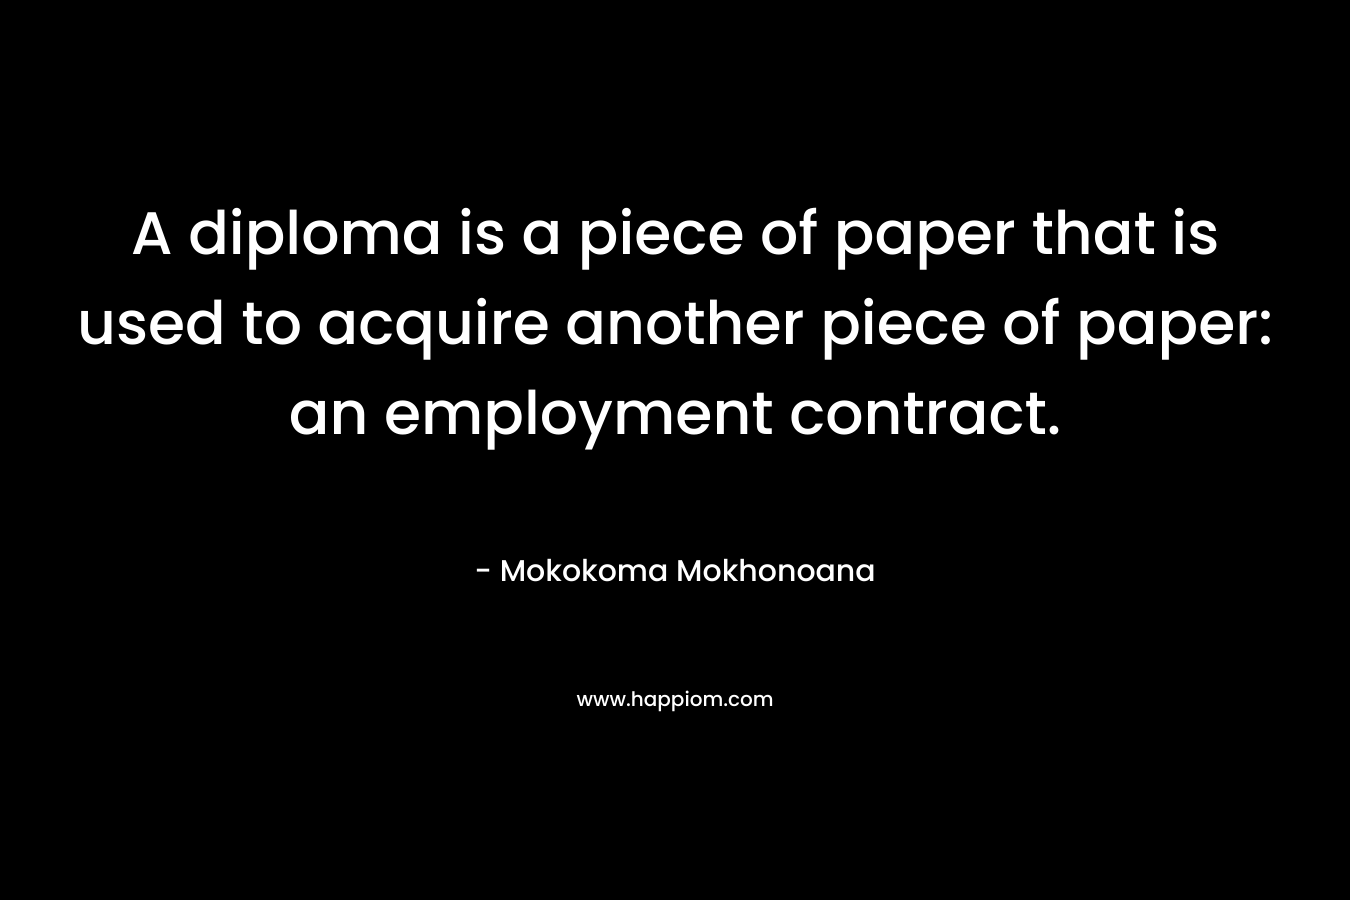 A diploma is a piece of paper that is used to acquire another piece of paper: an employment contract. – Mokokoma Mokhonoana